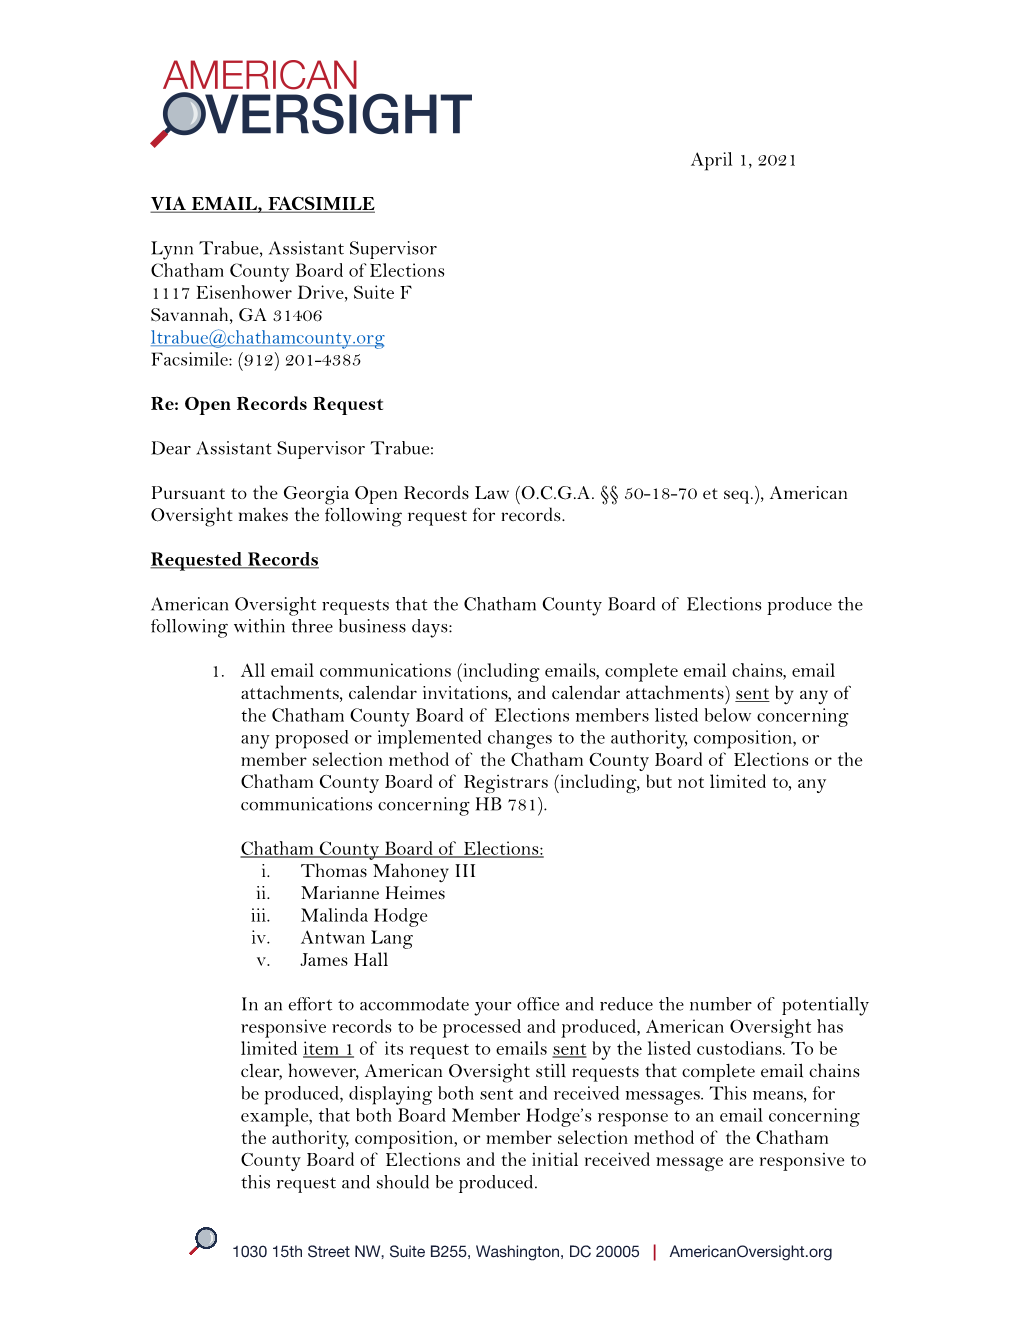 GA-CHATHAM-21-0438 Guidance Regarding the Search & Processing of Requested Records